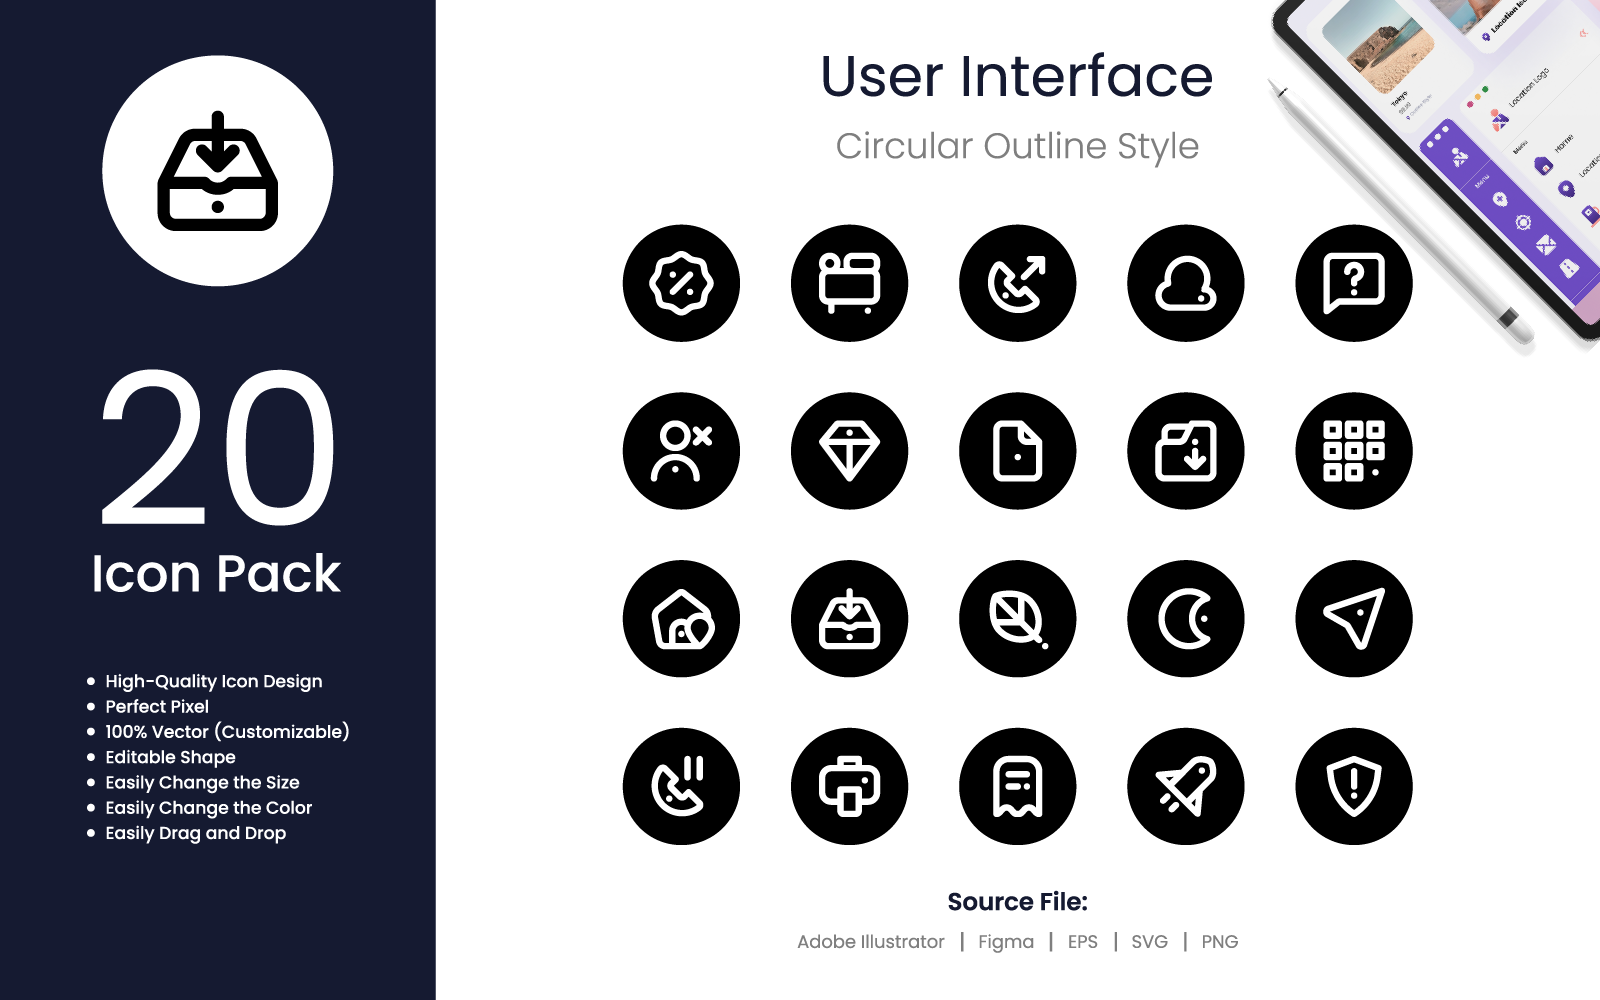 User Interface Icon Pack Circular Outline Style 3